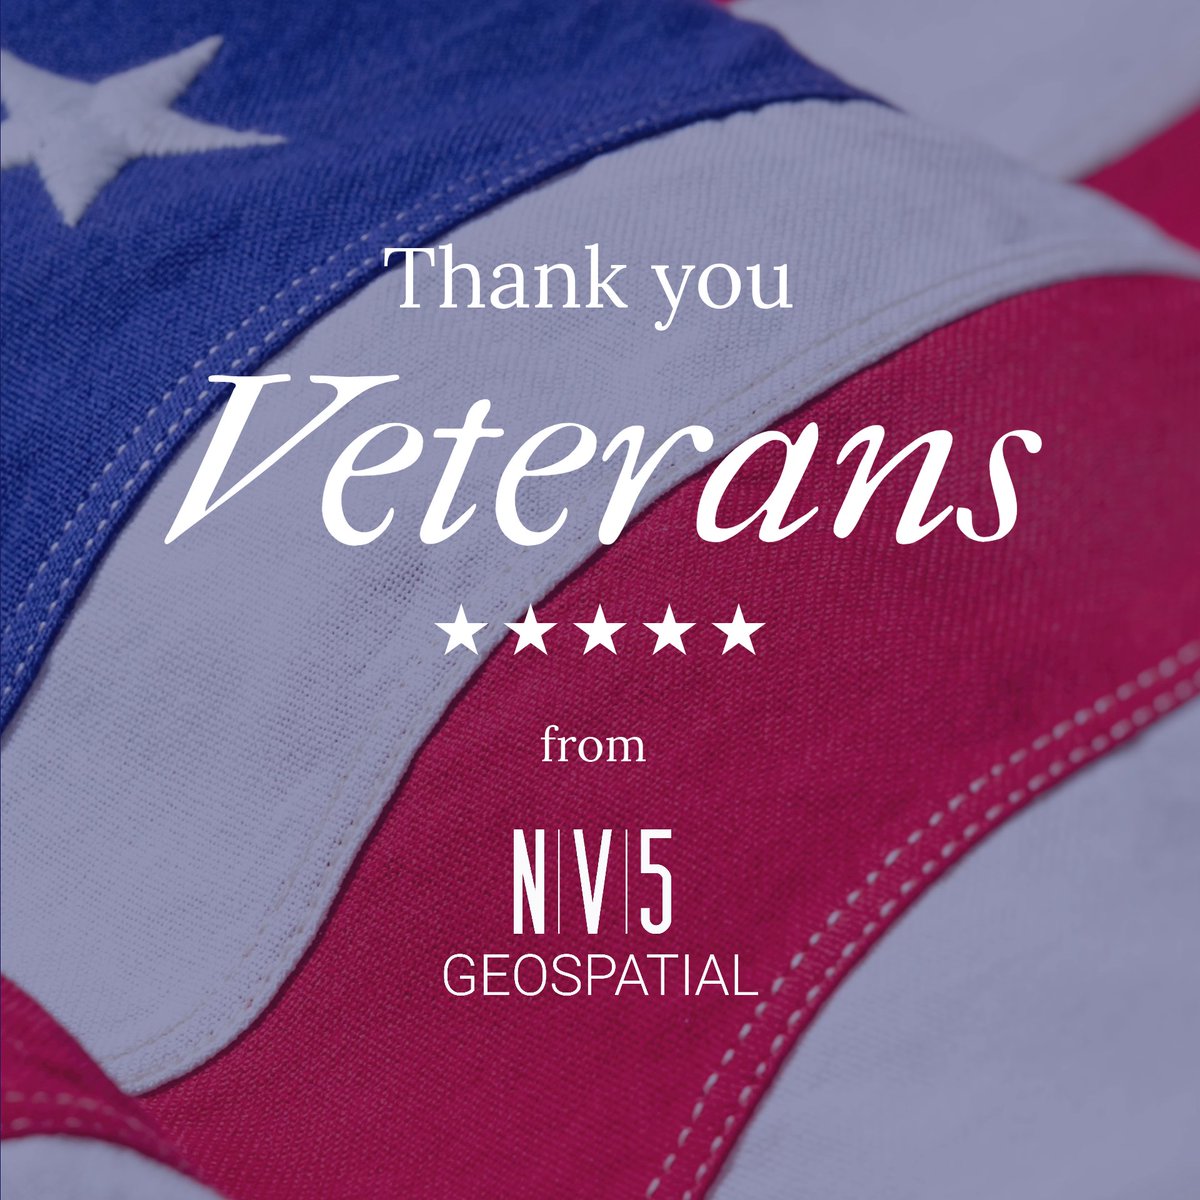 On this Veterans Day, NV5 Geospatial extends heartfelt gratitude to the brave men and women who have served and sacrificed for our country. Your courage, dedication, and selflessness inspire us every day. #VeteransDay #USA #Veterans #GIS #Geospatial